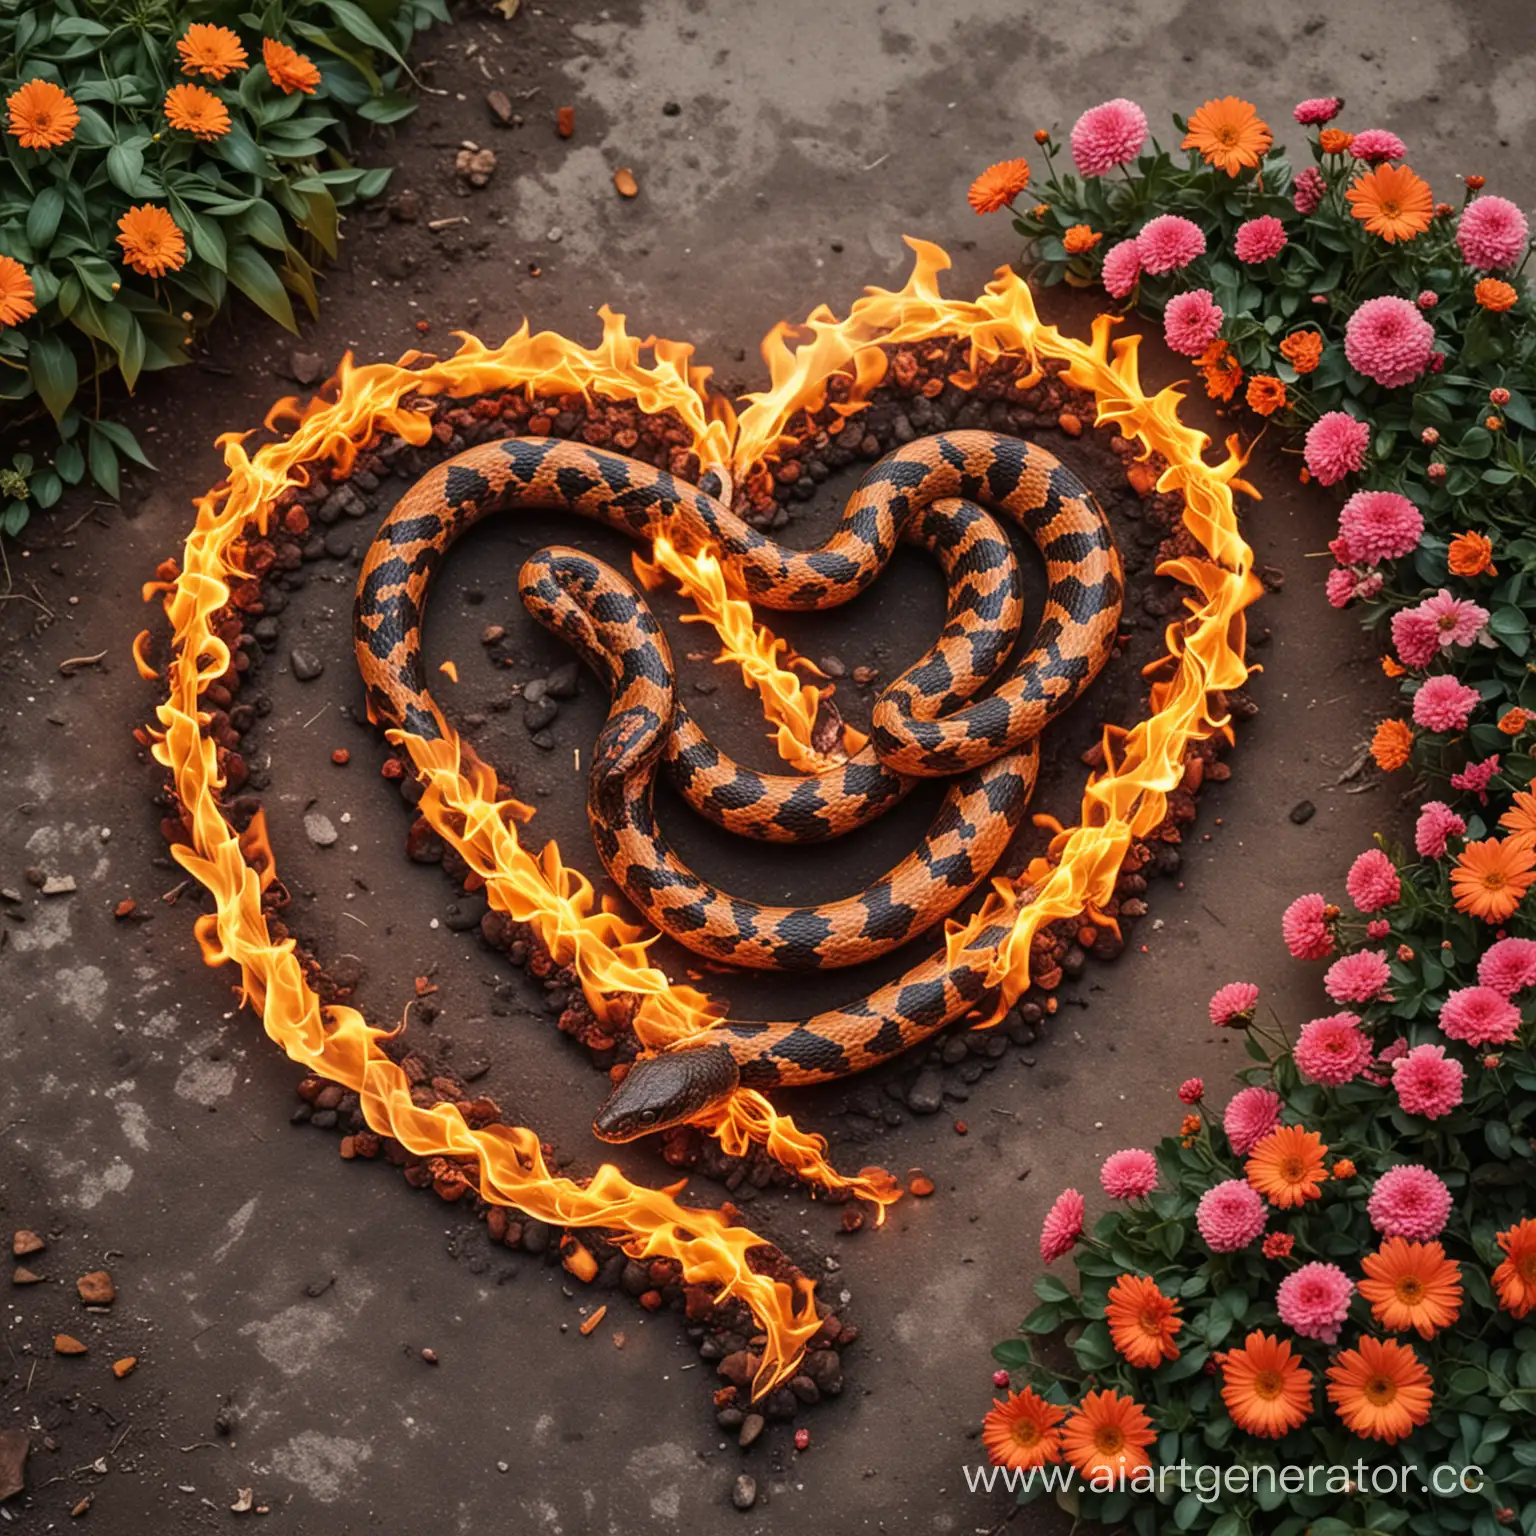 Flaming-Heart-Snake-amidst-Blossoms